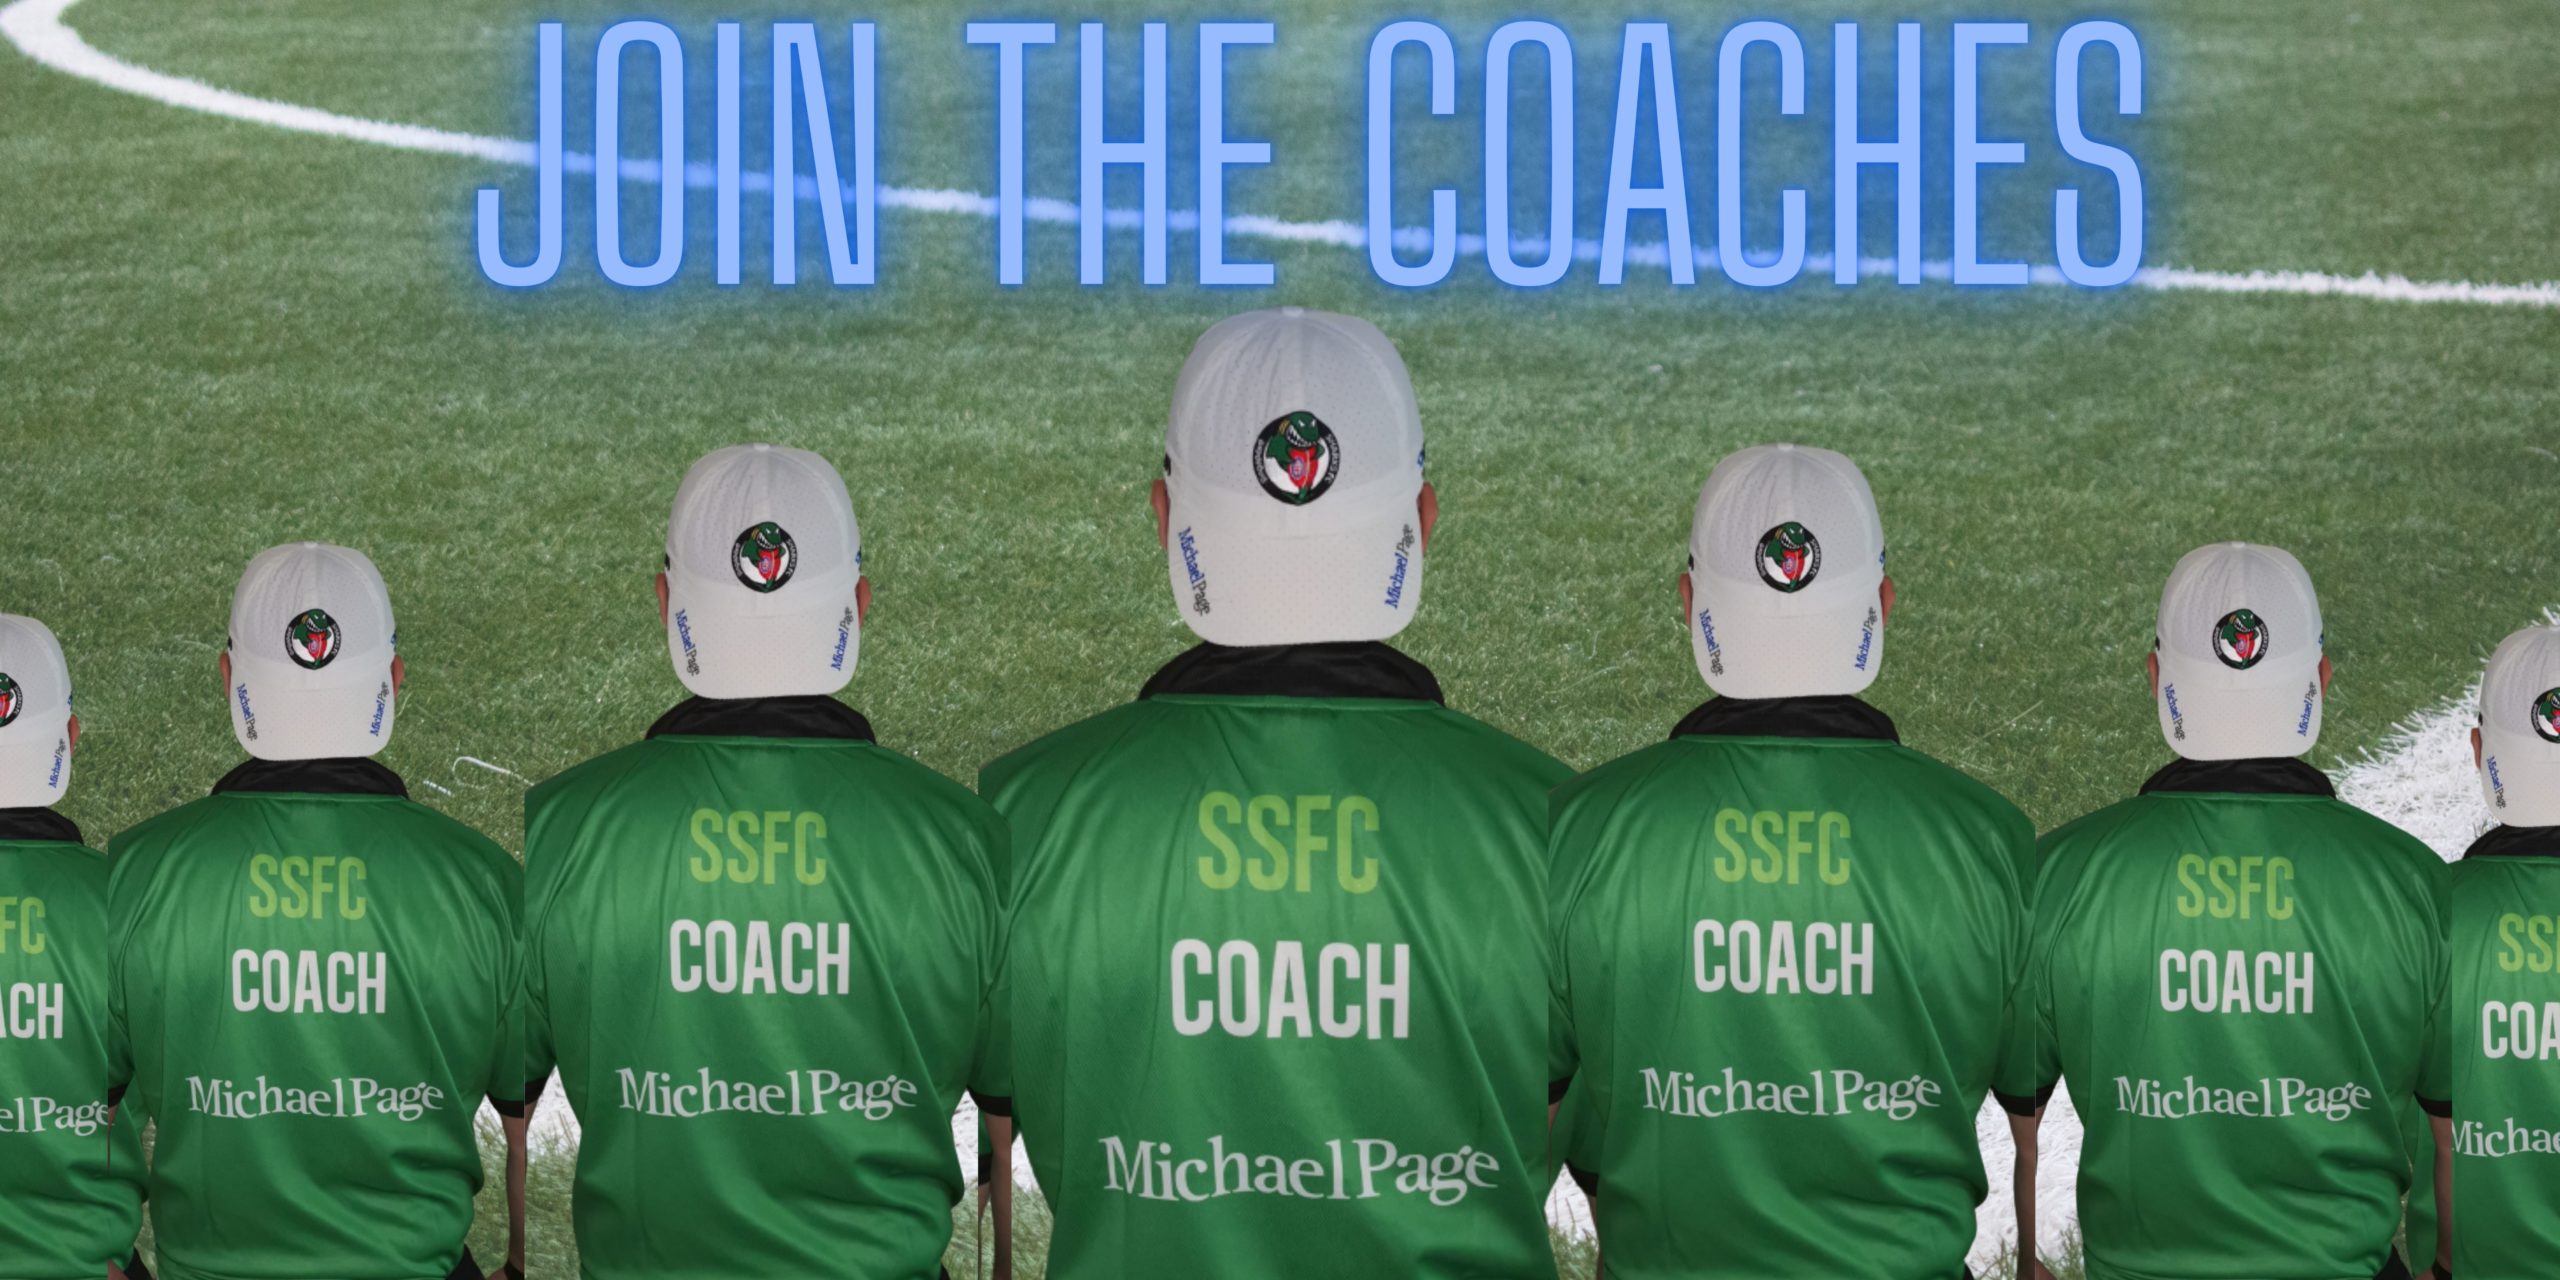 Join the coaches (1)